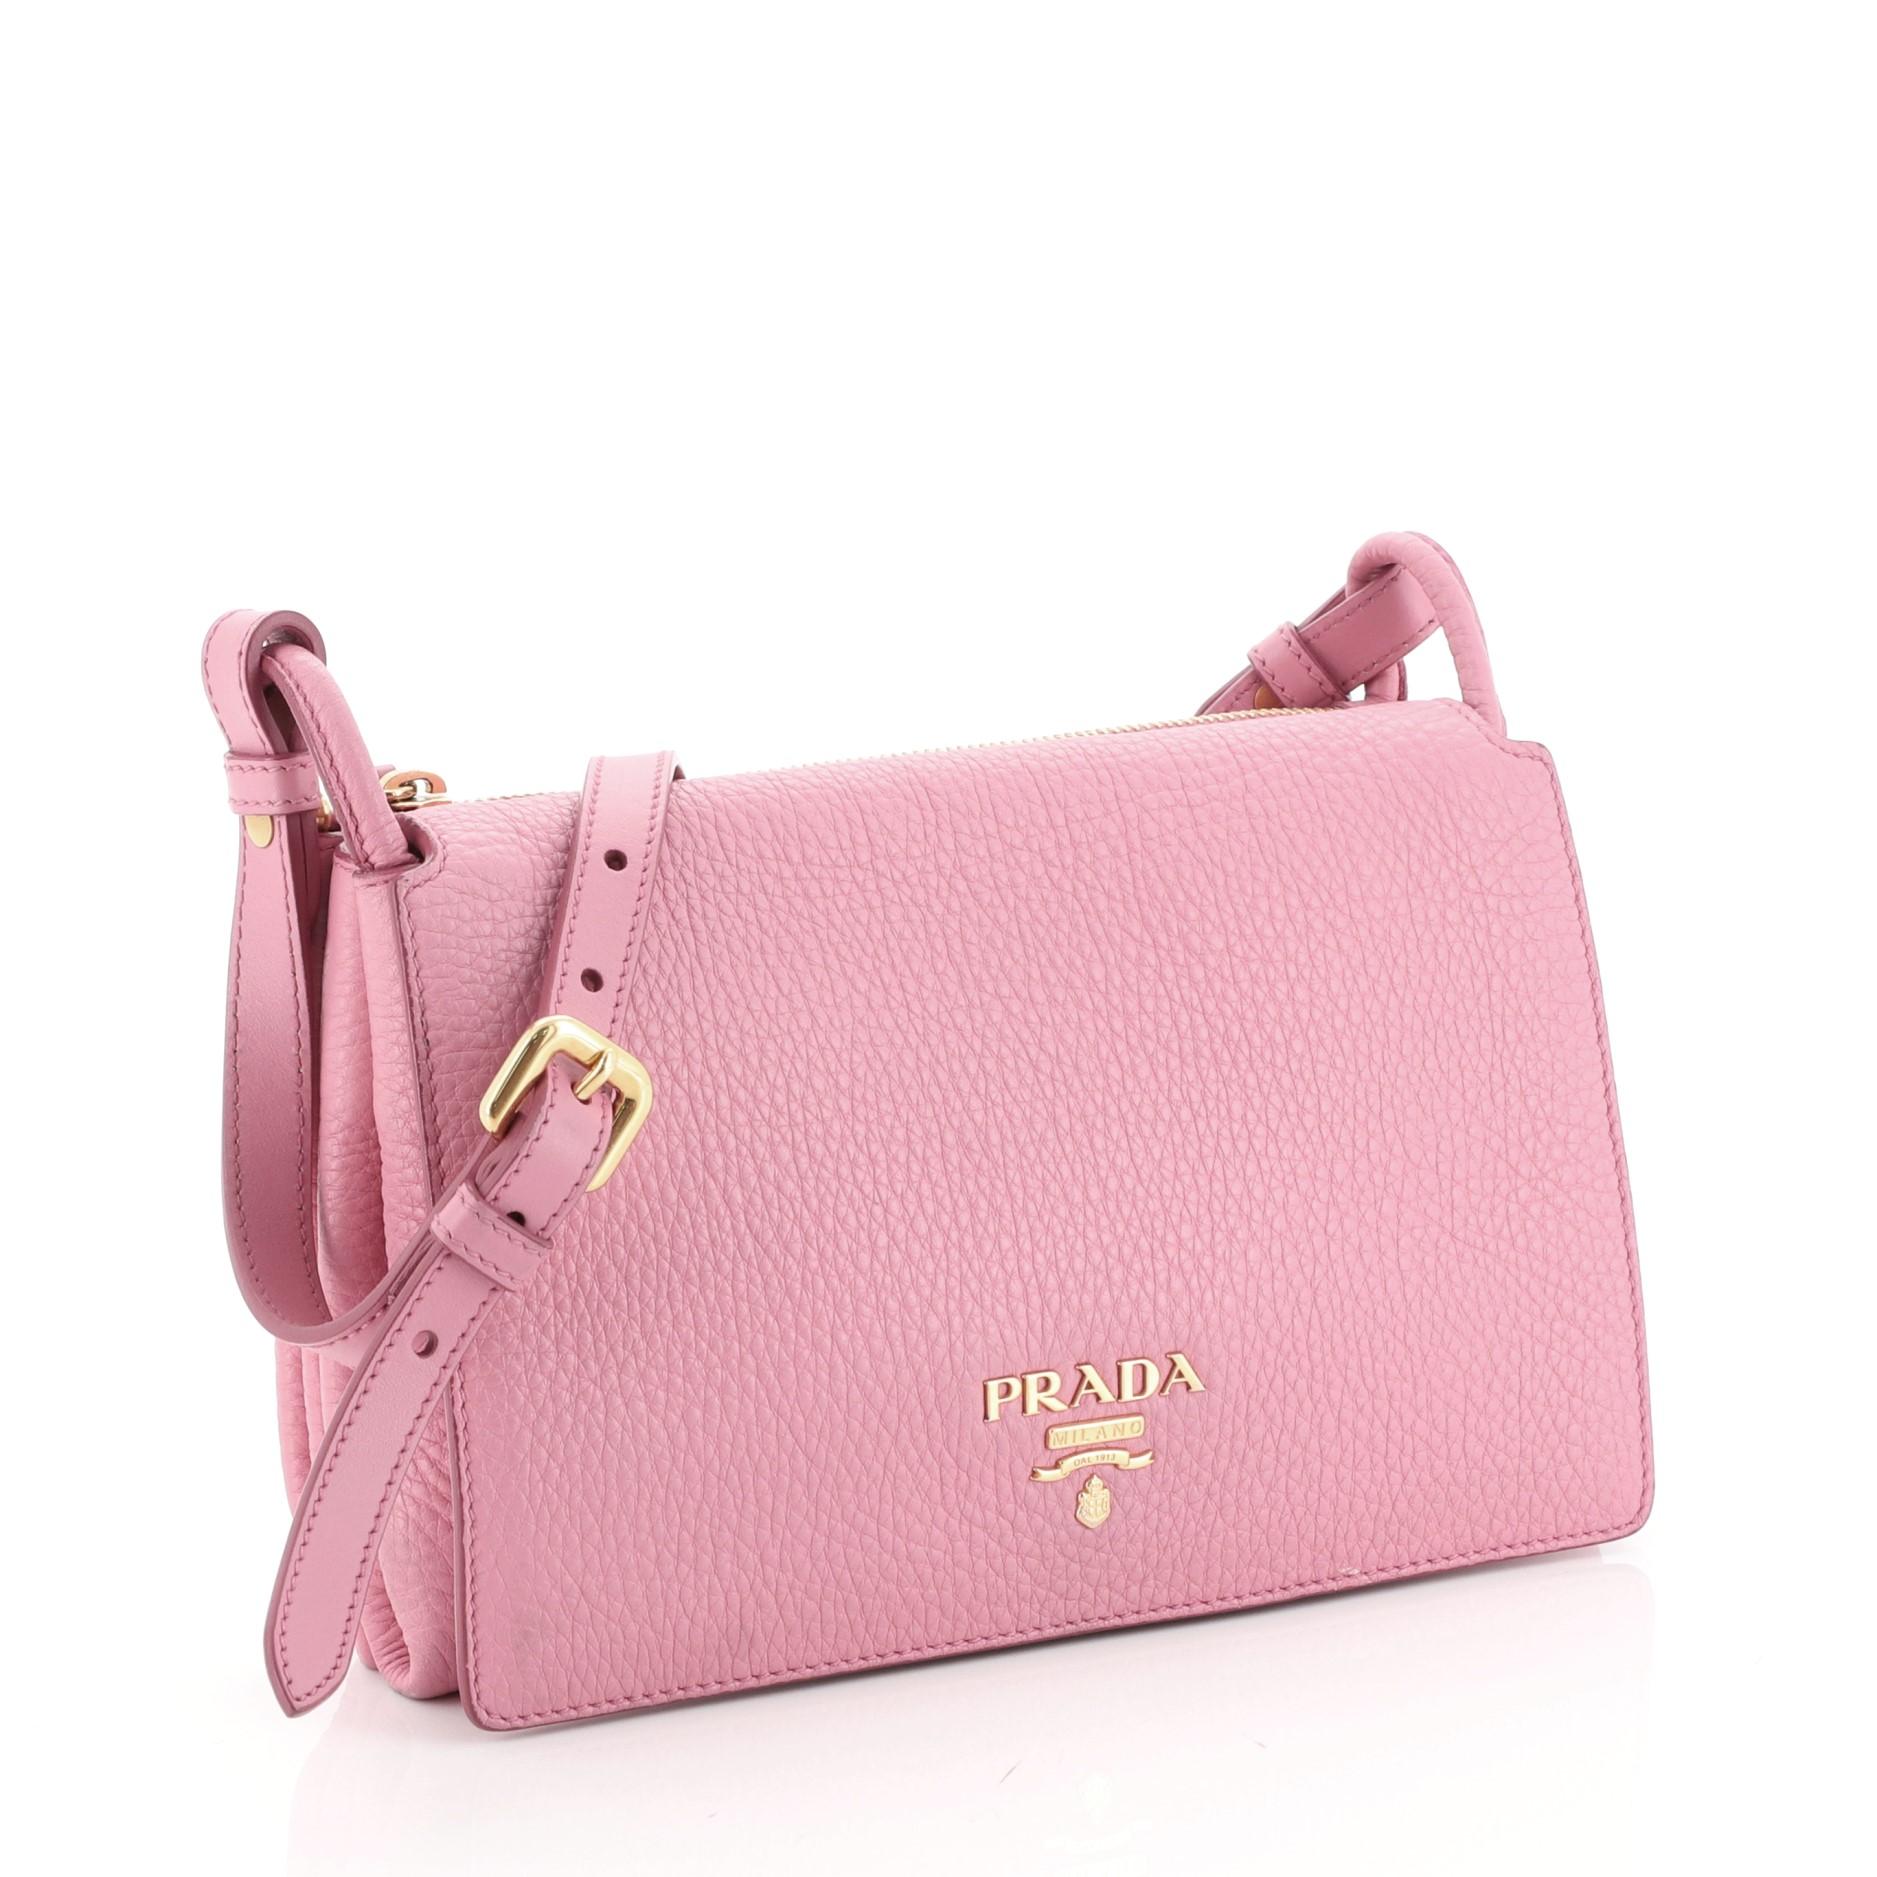 This Prada Flap Crossbody Bag Vitello Daino Small, crafted in pink vitello daino leather, features flat shoulder strap, front flap with raised Prada logo, and gold-tone hardware. Its magnetic closure opens to a pink fabric interior divided into two